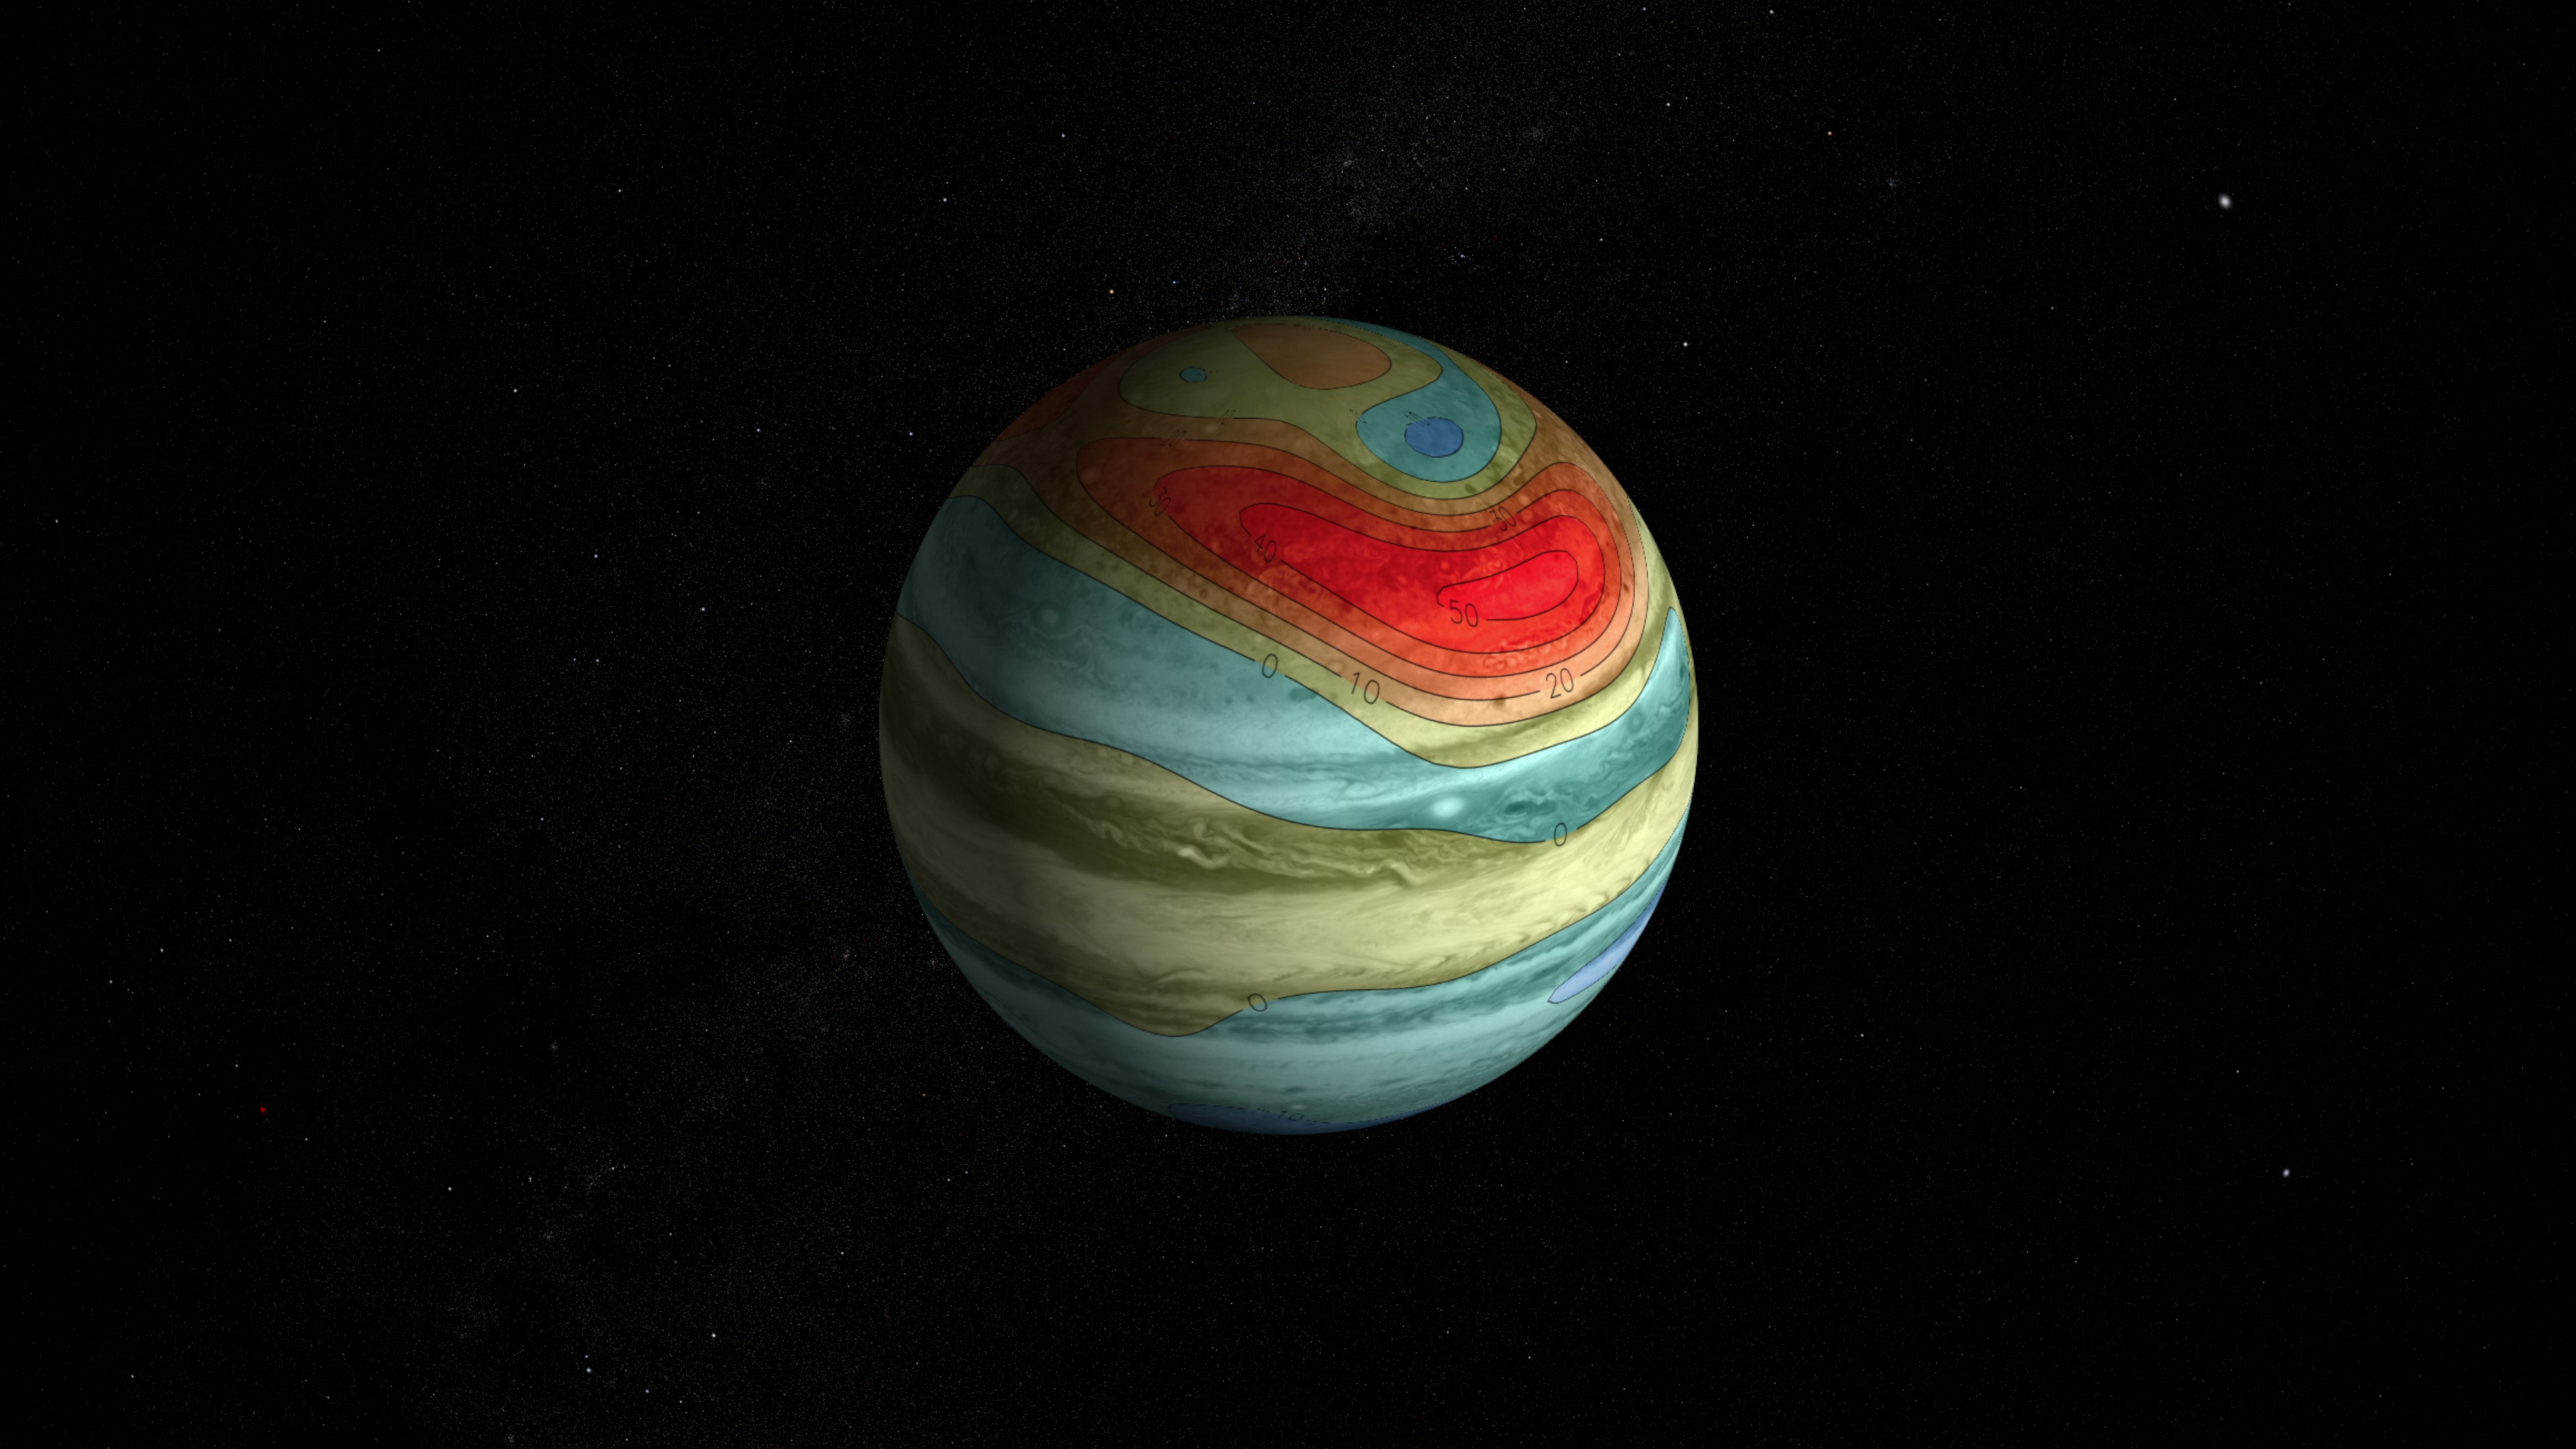 Take a tour of Jupiter's dynamo, the source of its giant magnetic field, in this new global map from the Juno mission. Watch this video on the NASA.gov Video YouTube channel.